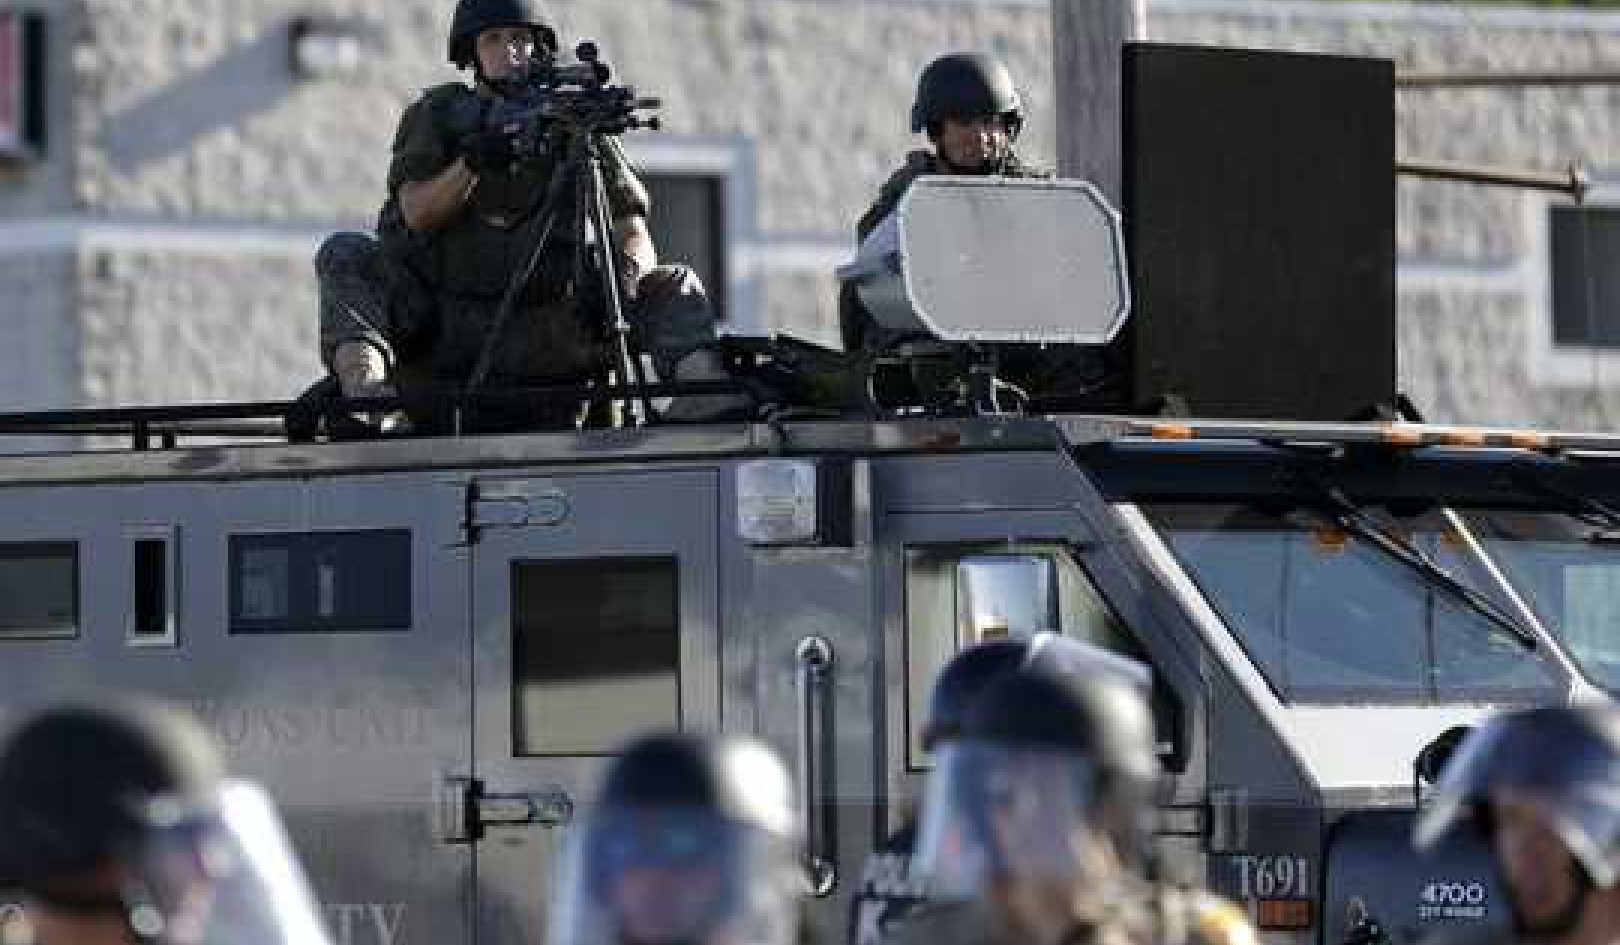 Police With Lots Of Military Gear Kill Civilians More Often Than Less Militarized Officers